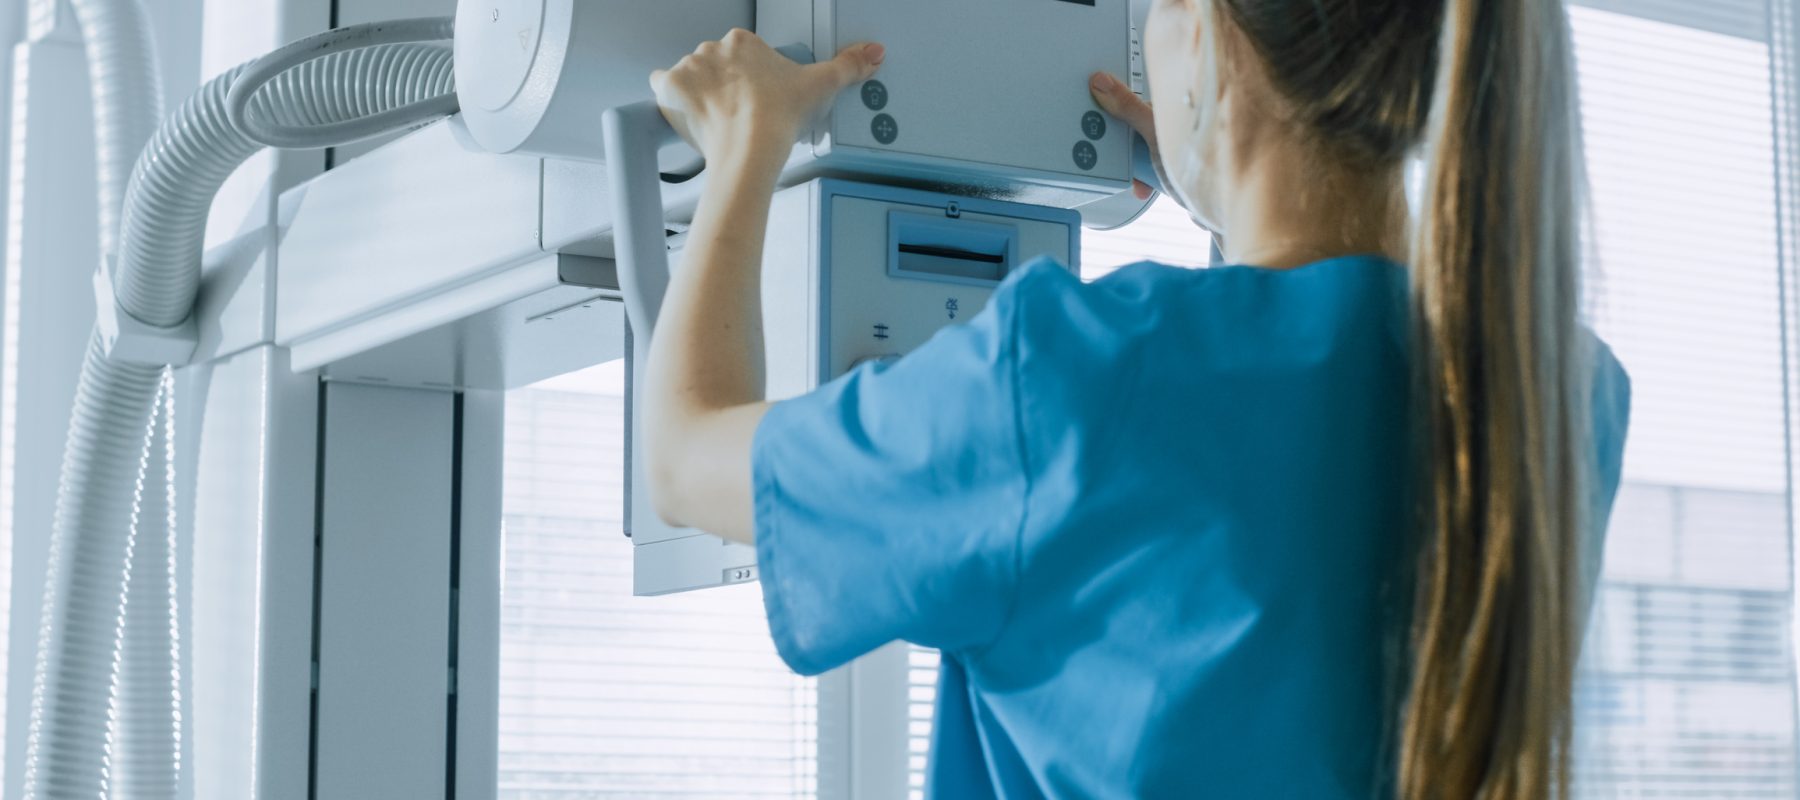 In the Hospital, Female Technician adjusts X-Ray Scanner / Machine. Modern Hospital with Technologically Advanced Medical Equipment and Professional Personnel.